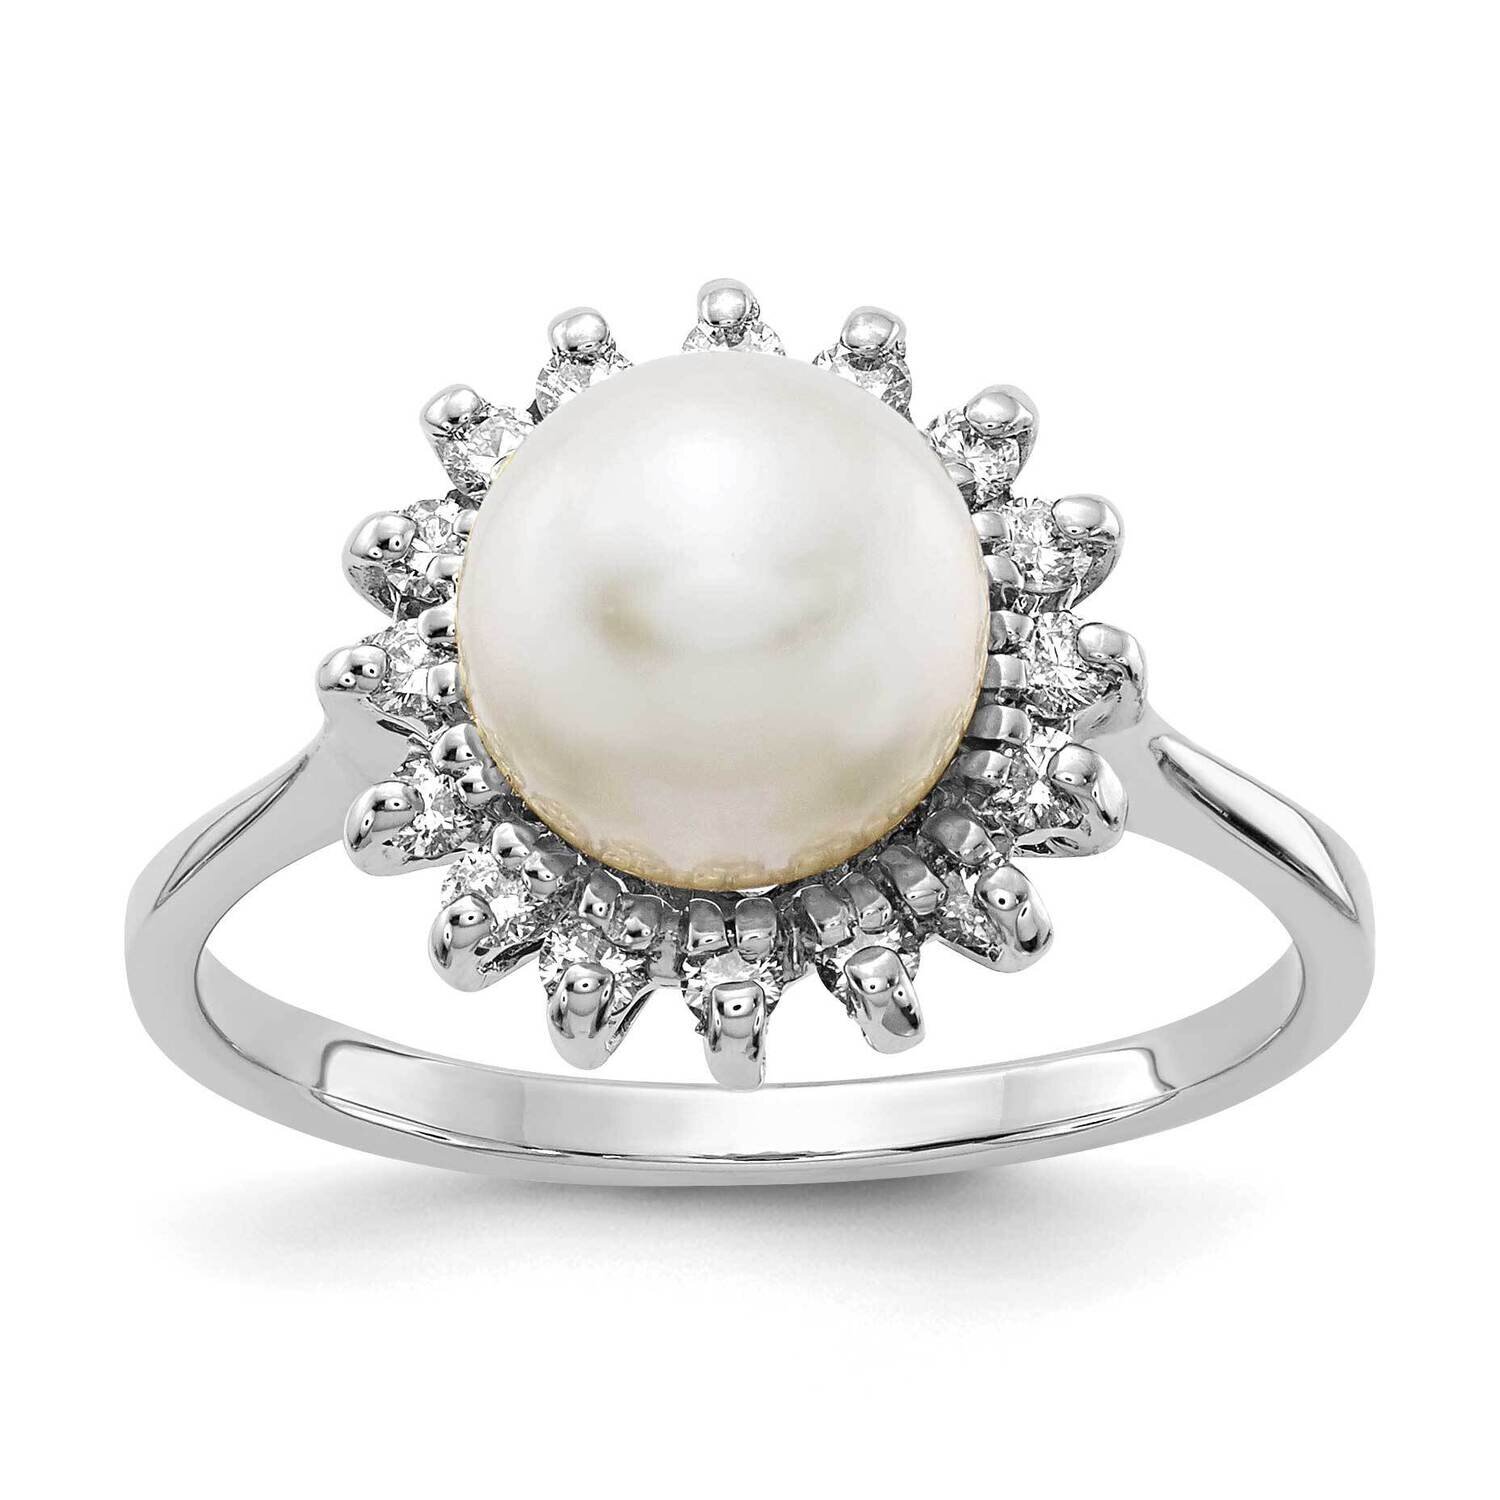 7.5mm Fw Cultured Pearl Aaa Diamond Ring 14k White Gold Y4379PL/AAA